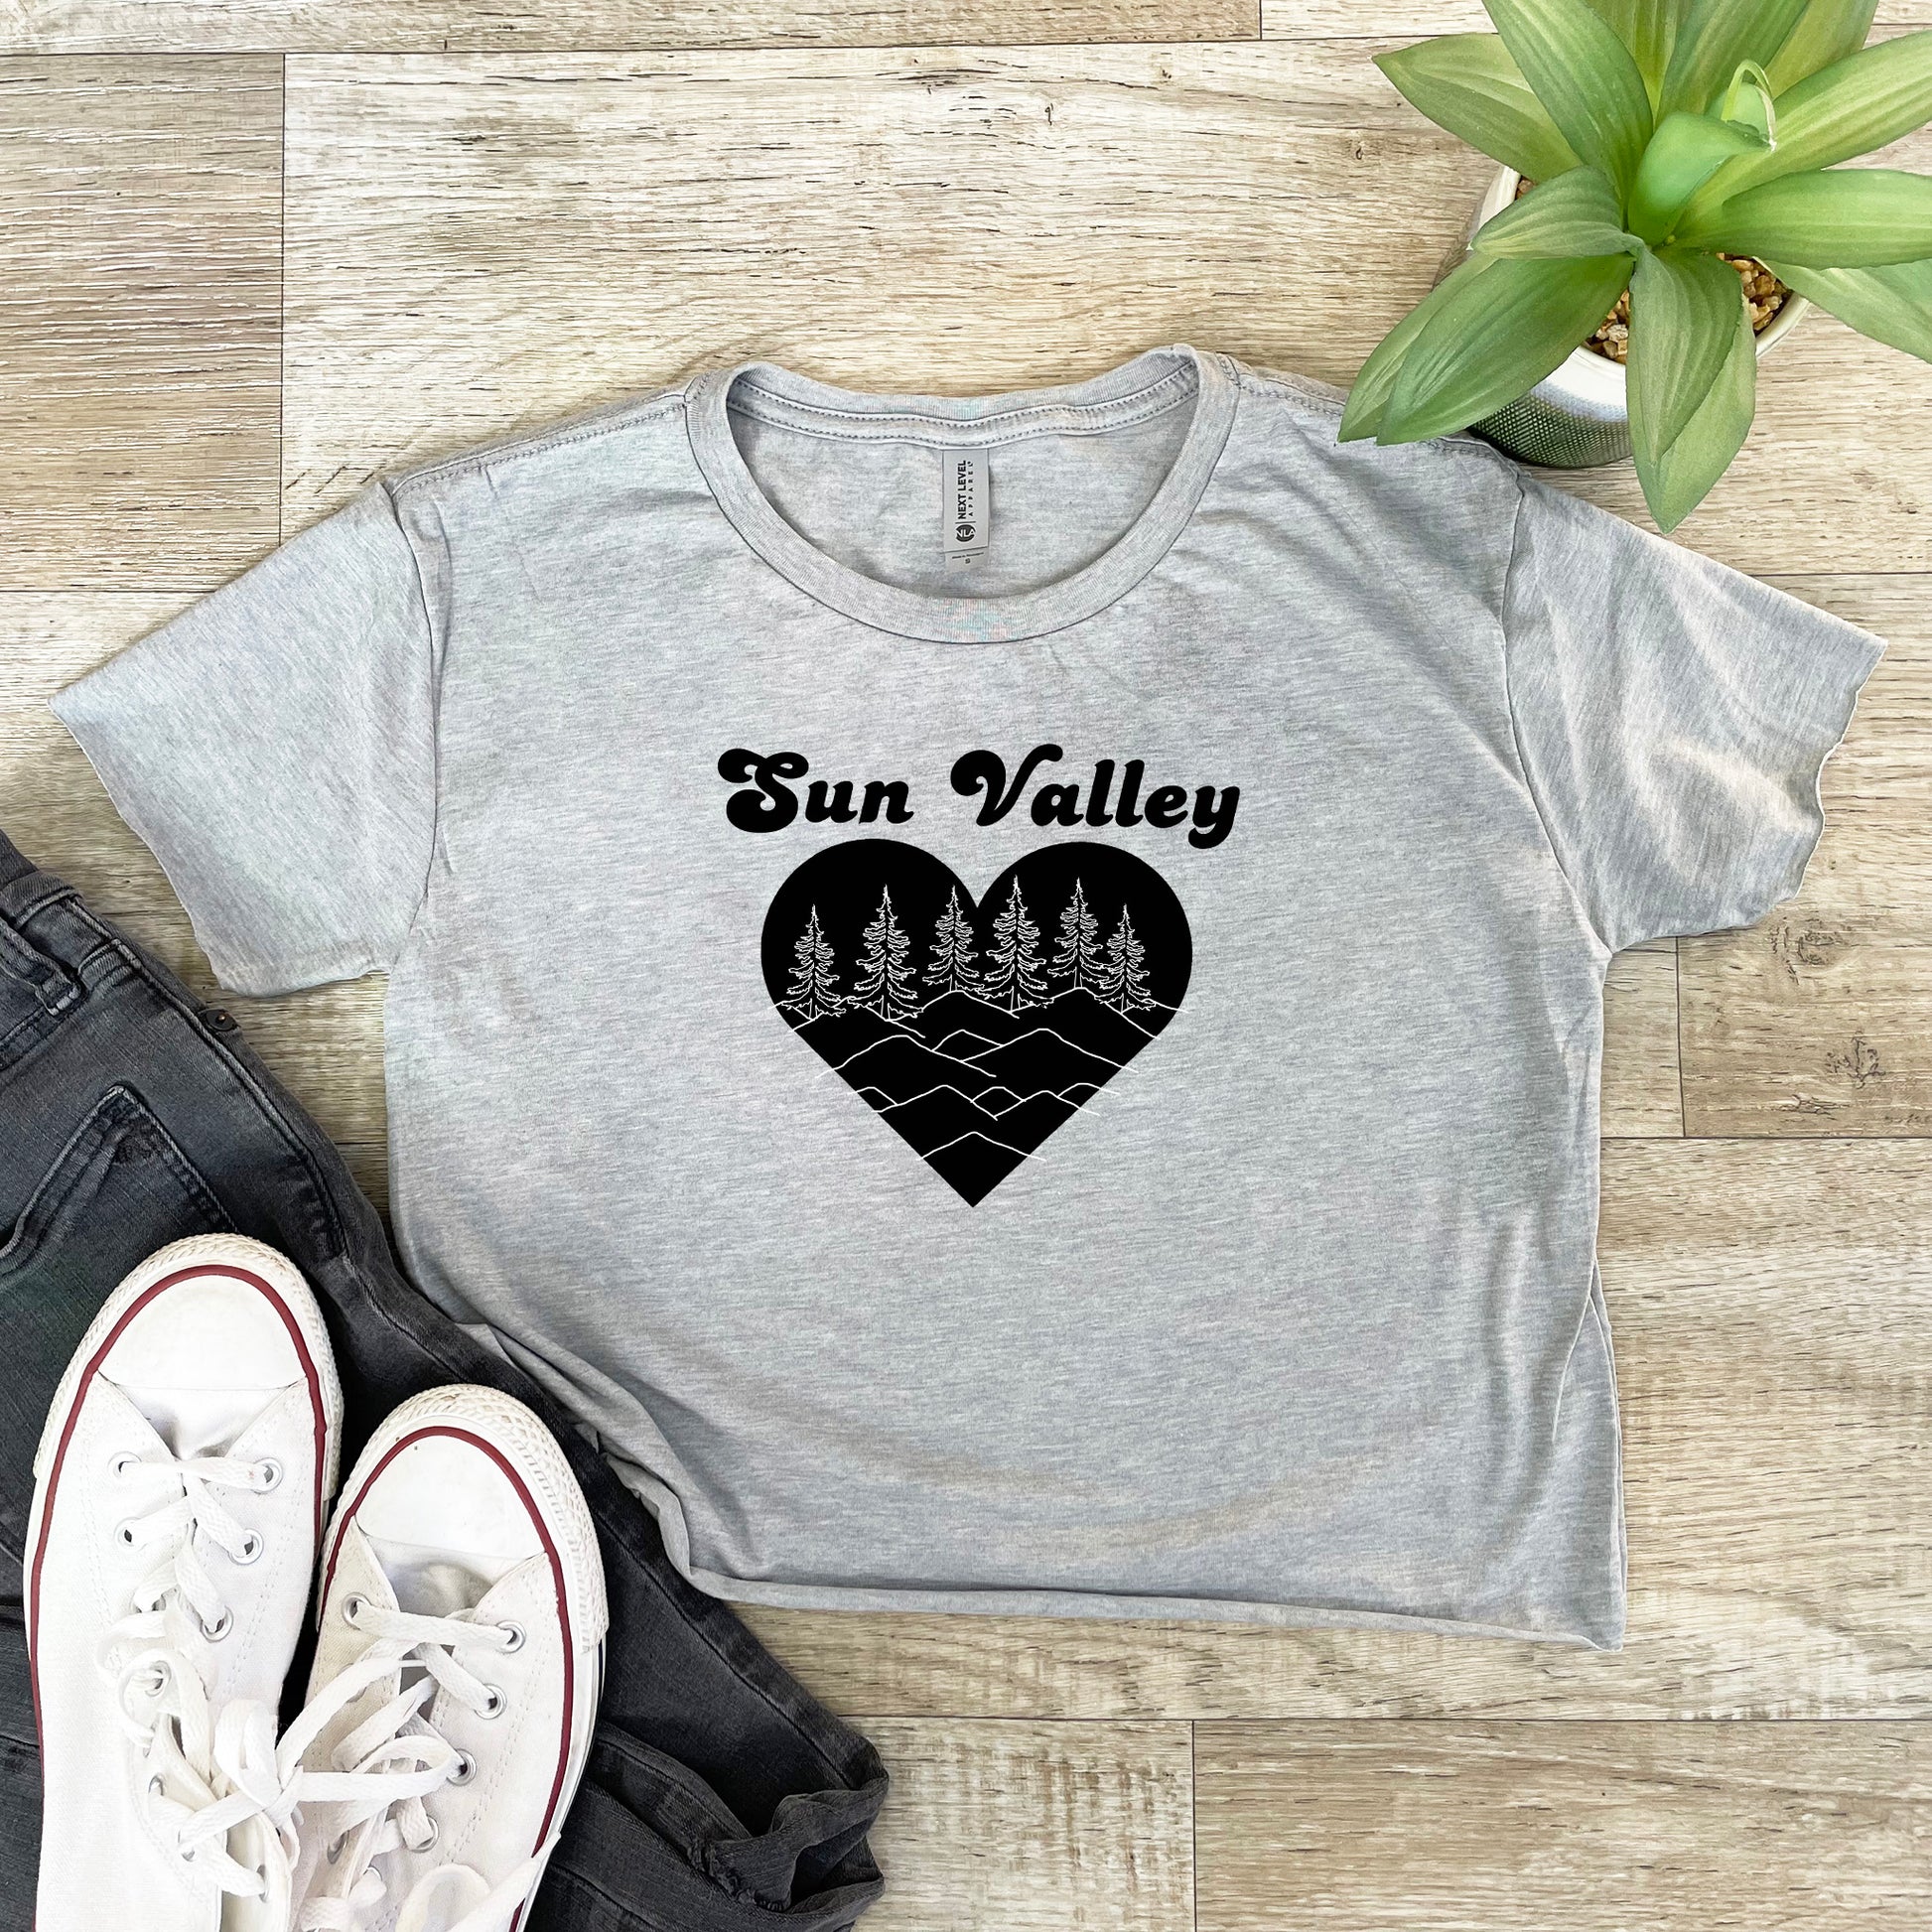 a t - shirt that says sun valley with a heart on it